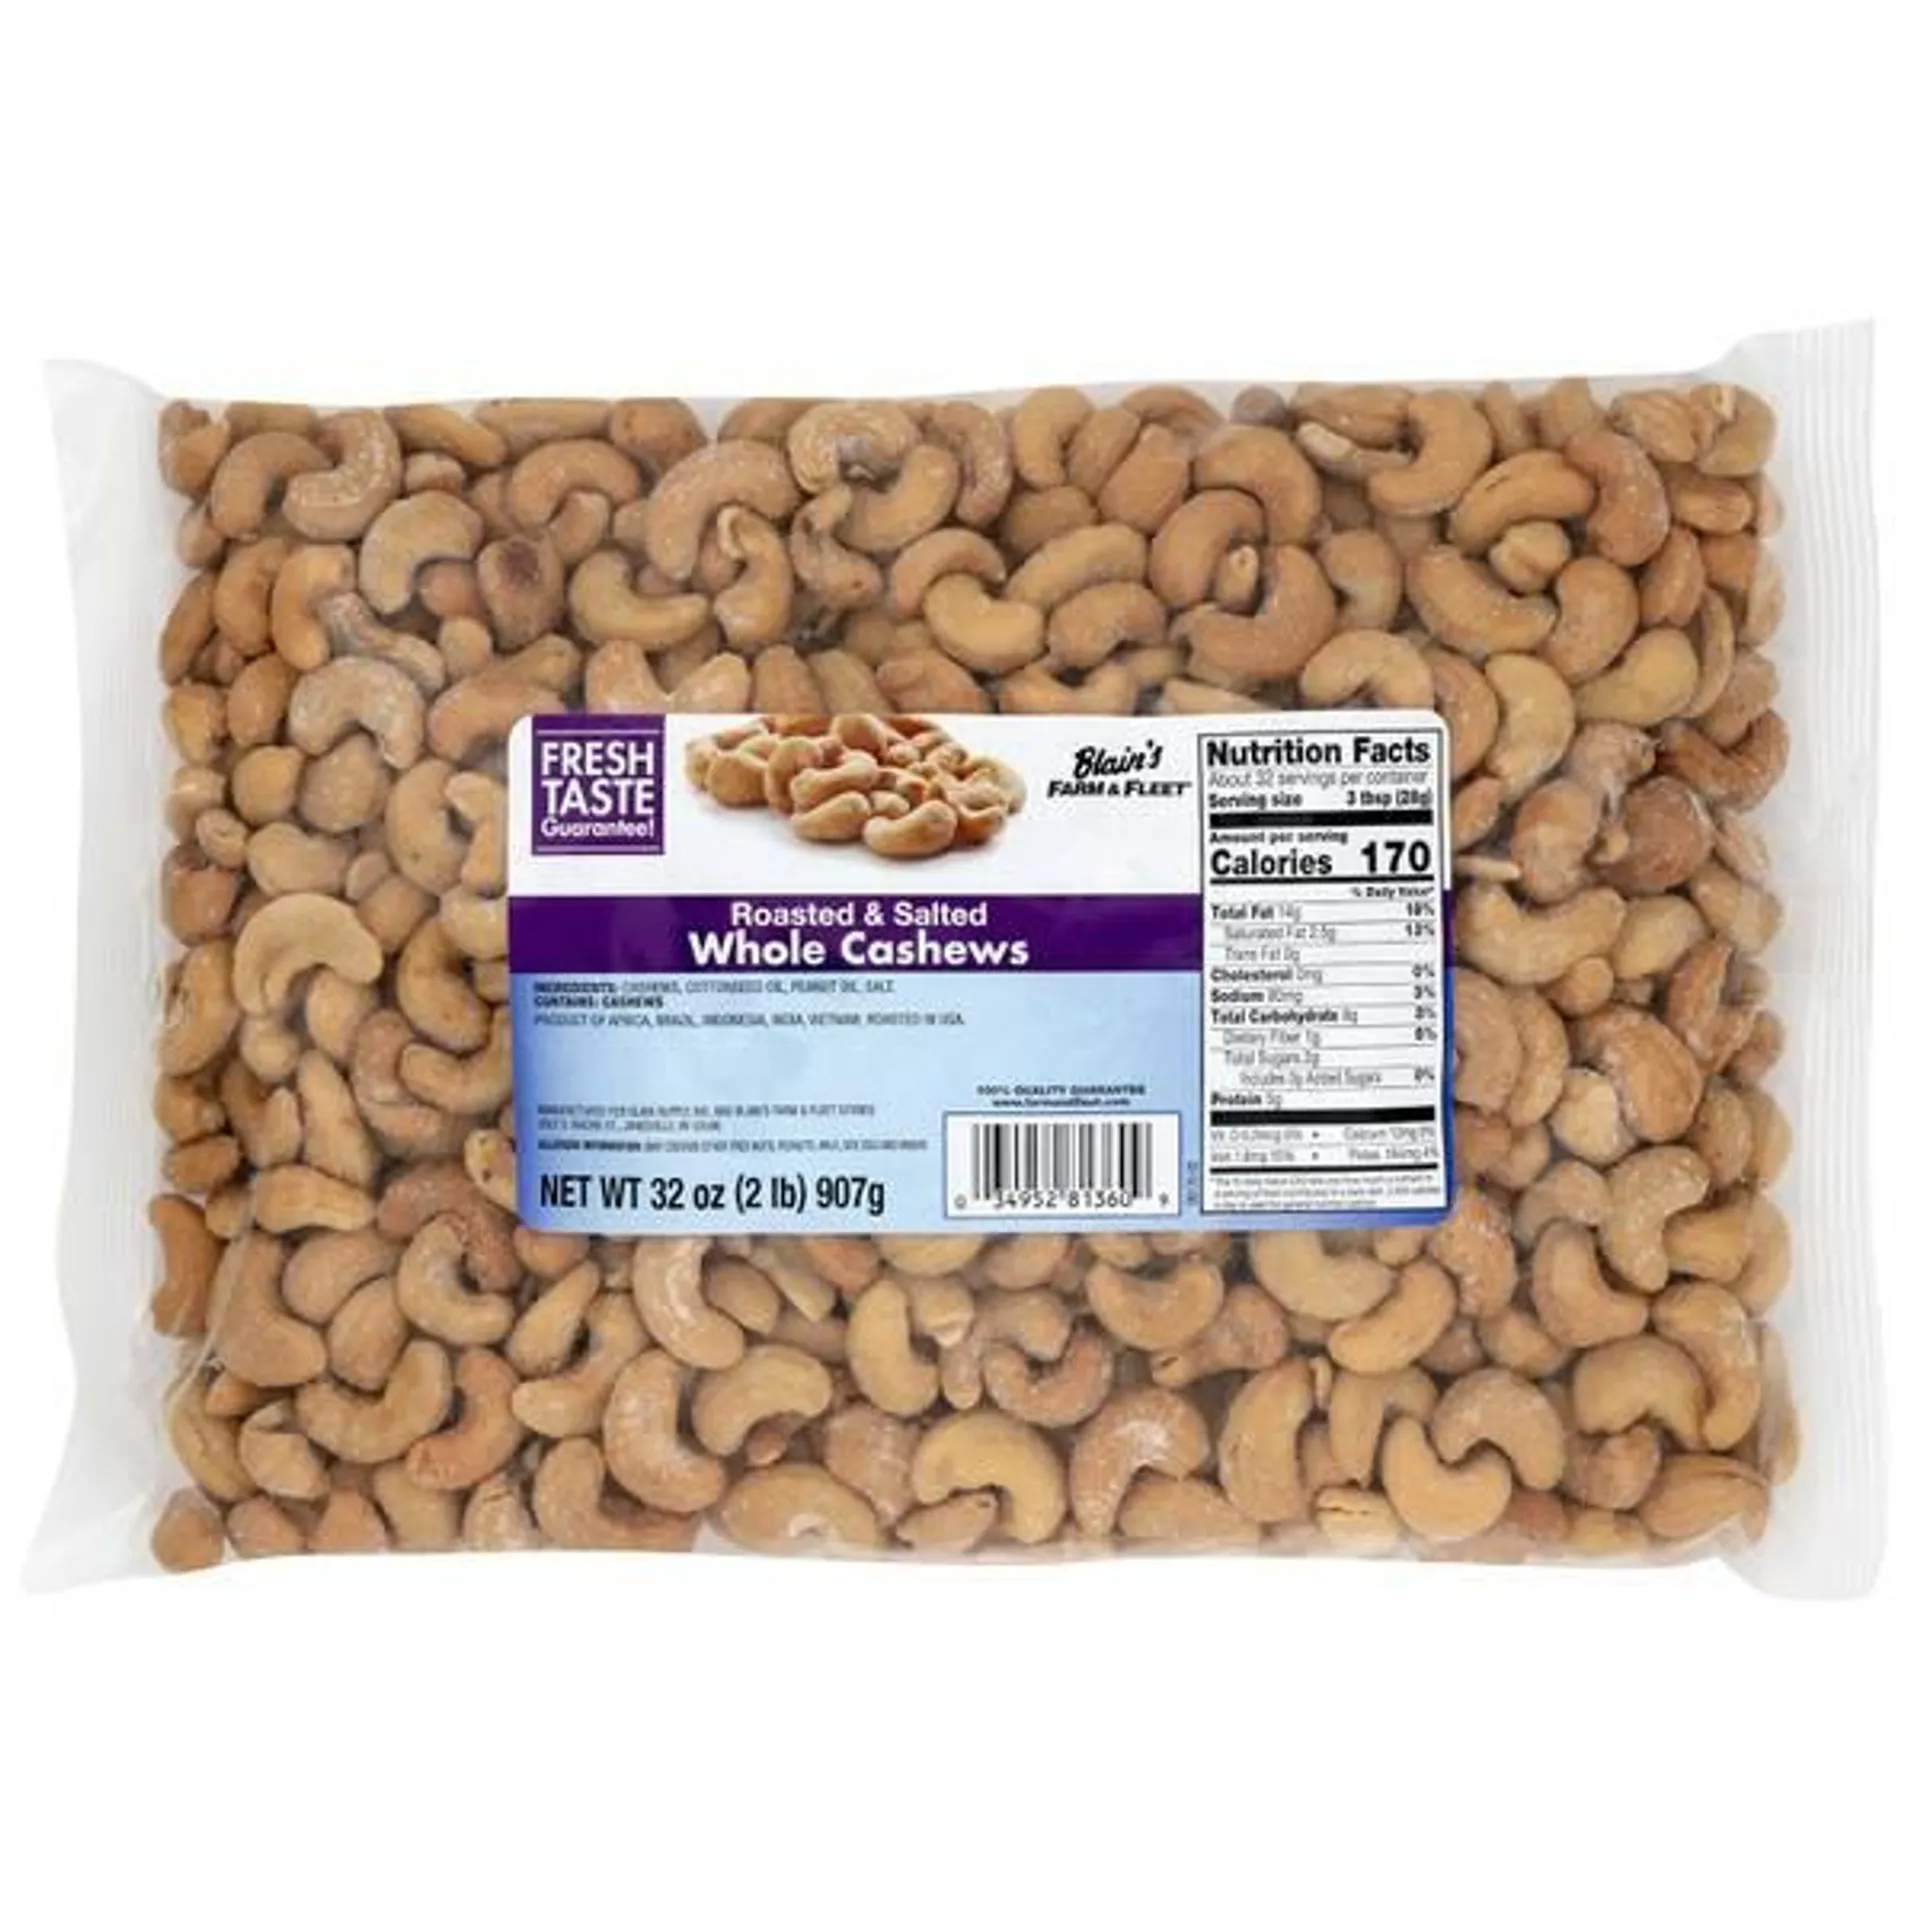 32oz Roasted and Salted Whole Cashews